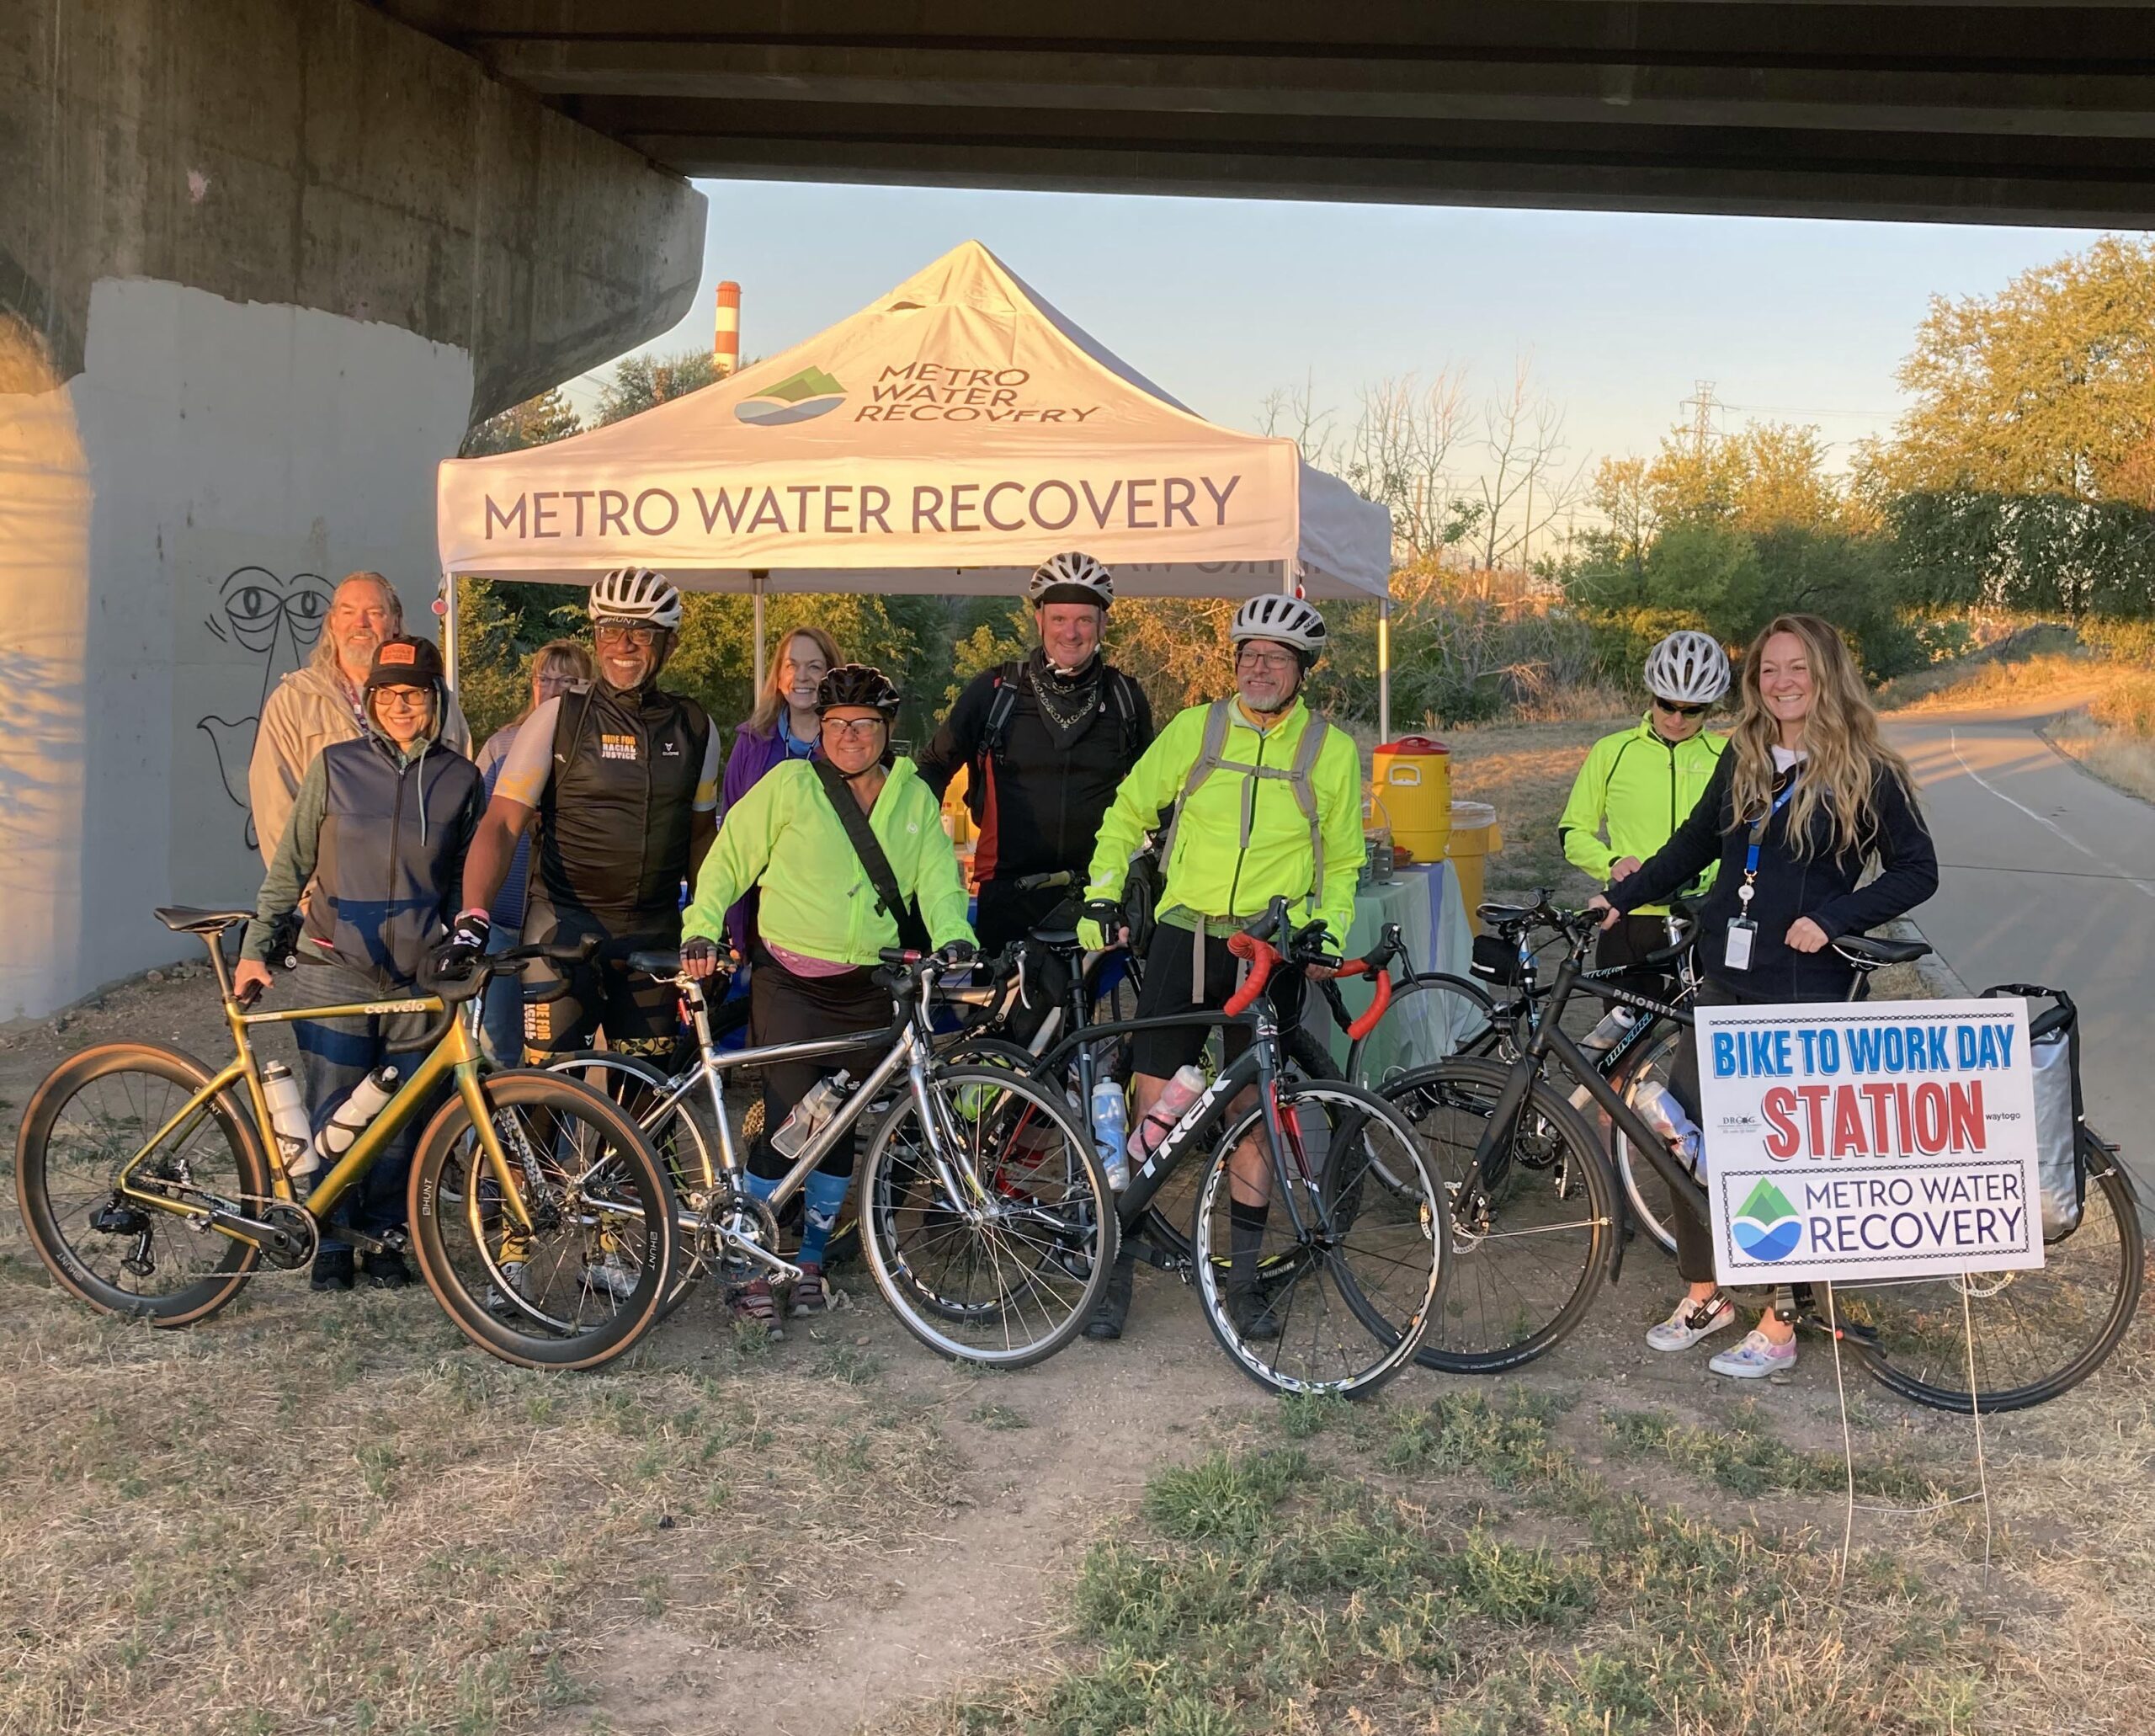 Our team of Metro volunteers standing in front of the Bike to Work Day support tent along the South Platte River